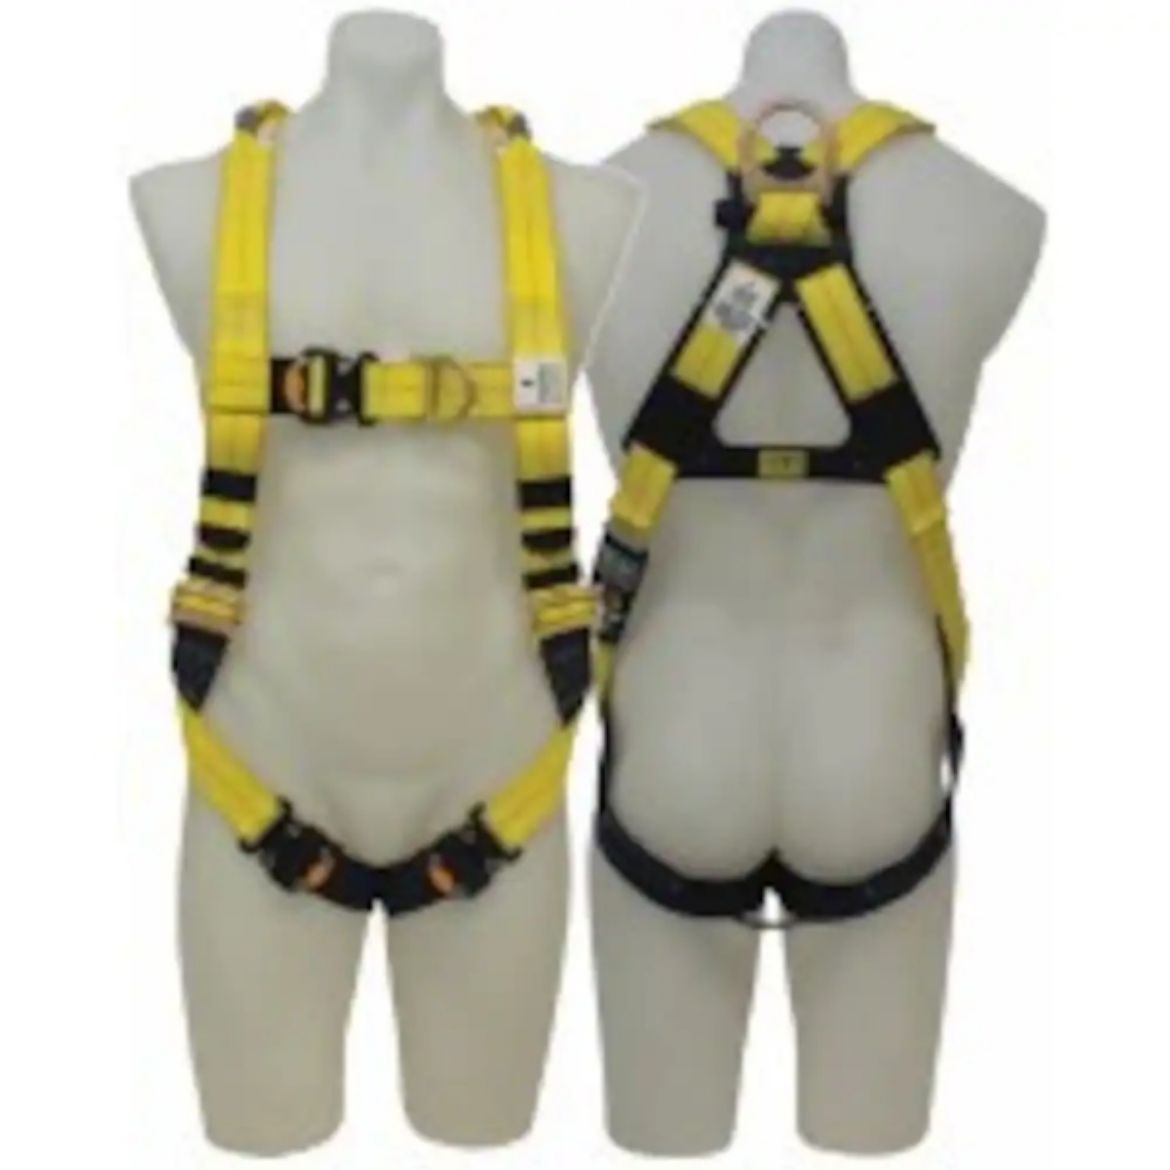 Picture of 803XL0054 DELTA RIGGERS HARNESS - XLARGE, WITH REAR STAND UP D-RING, FRONT FALL ARREST D-RING, QUICK CONNECT BUCKLES & CONFINED SPACE LOOPS